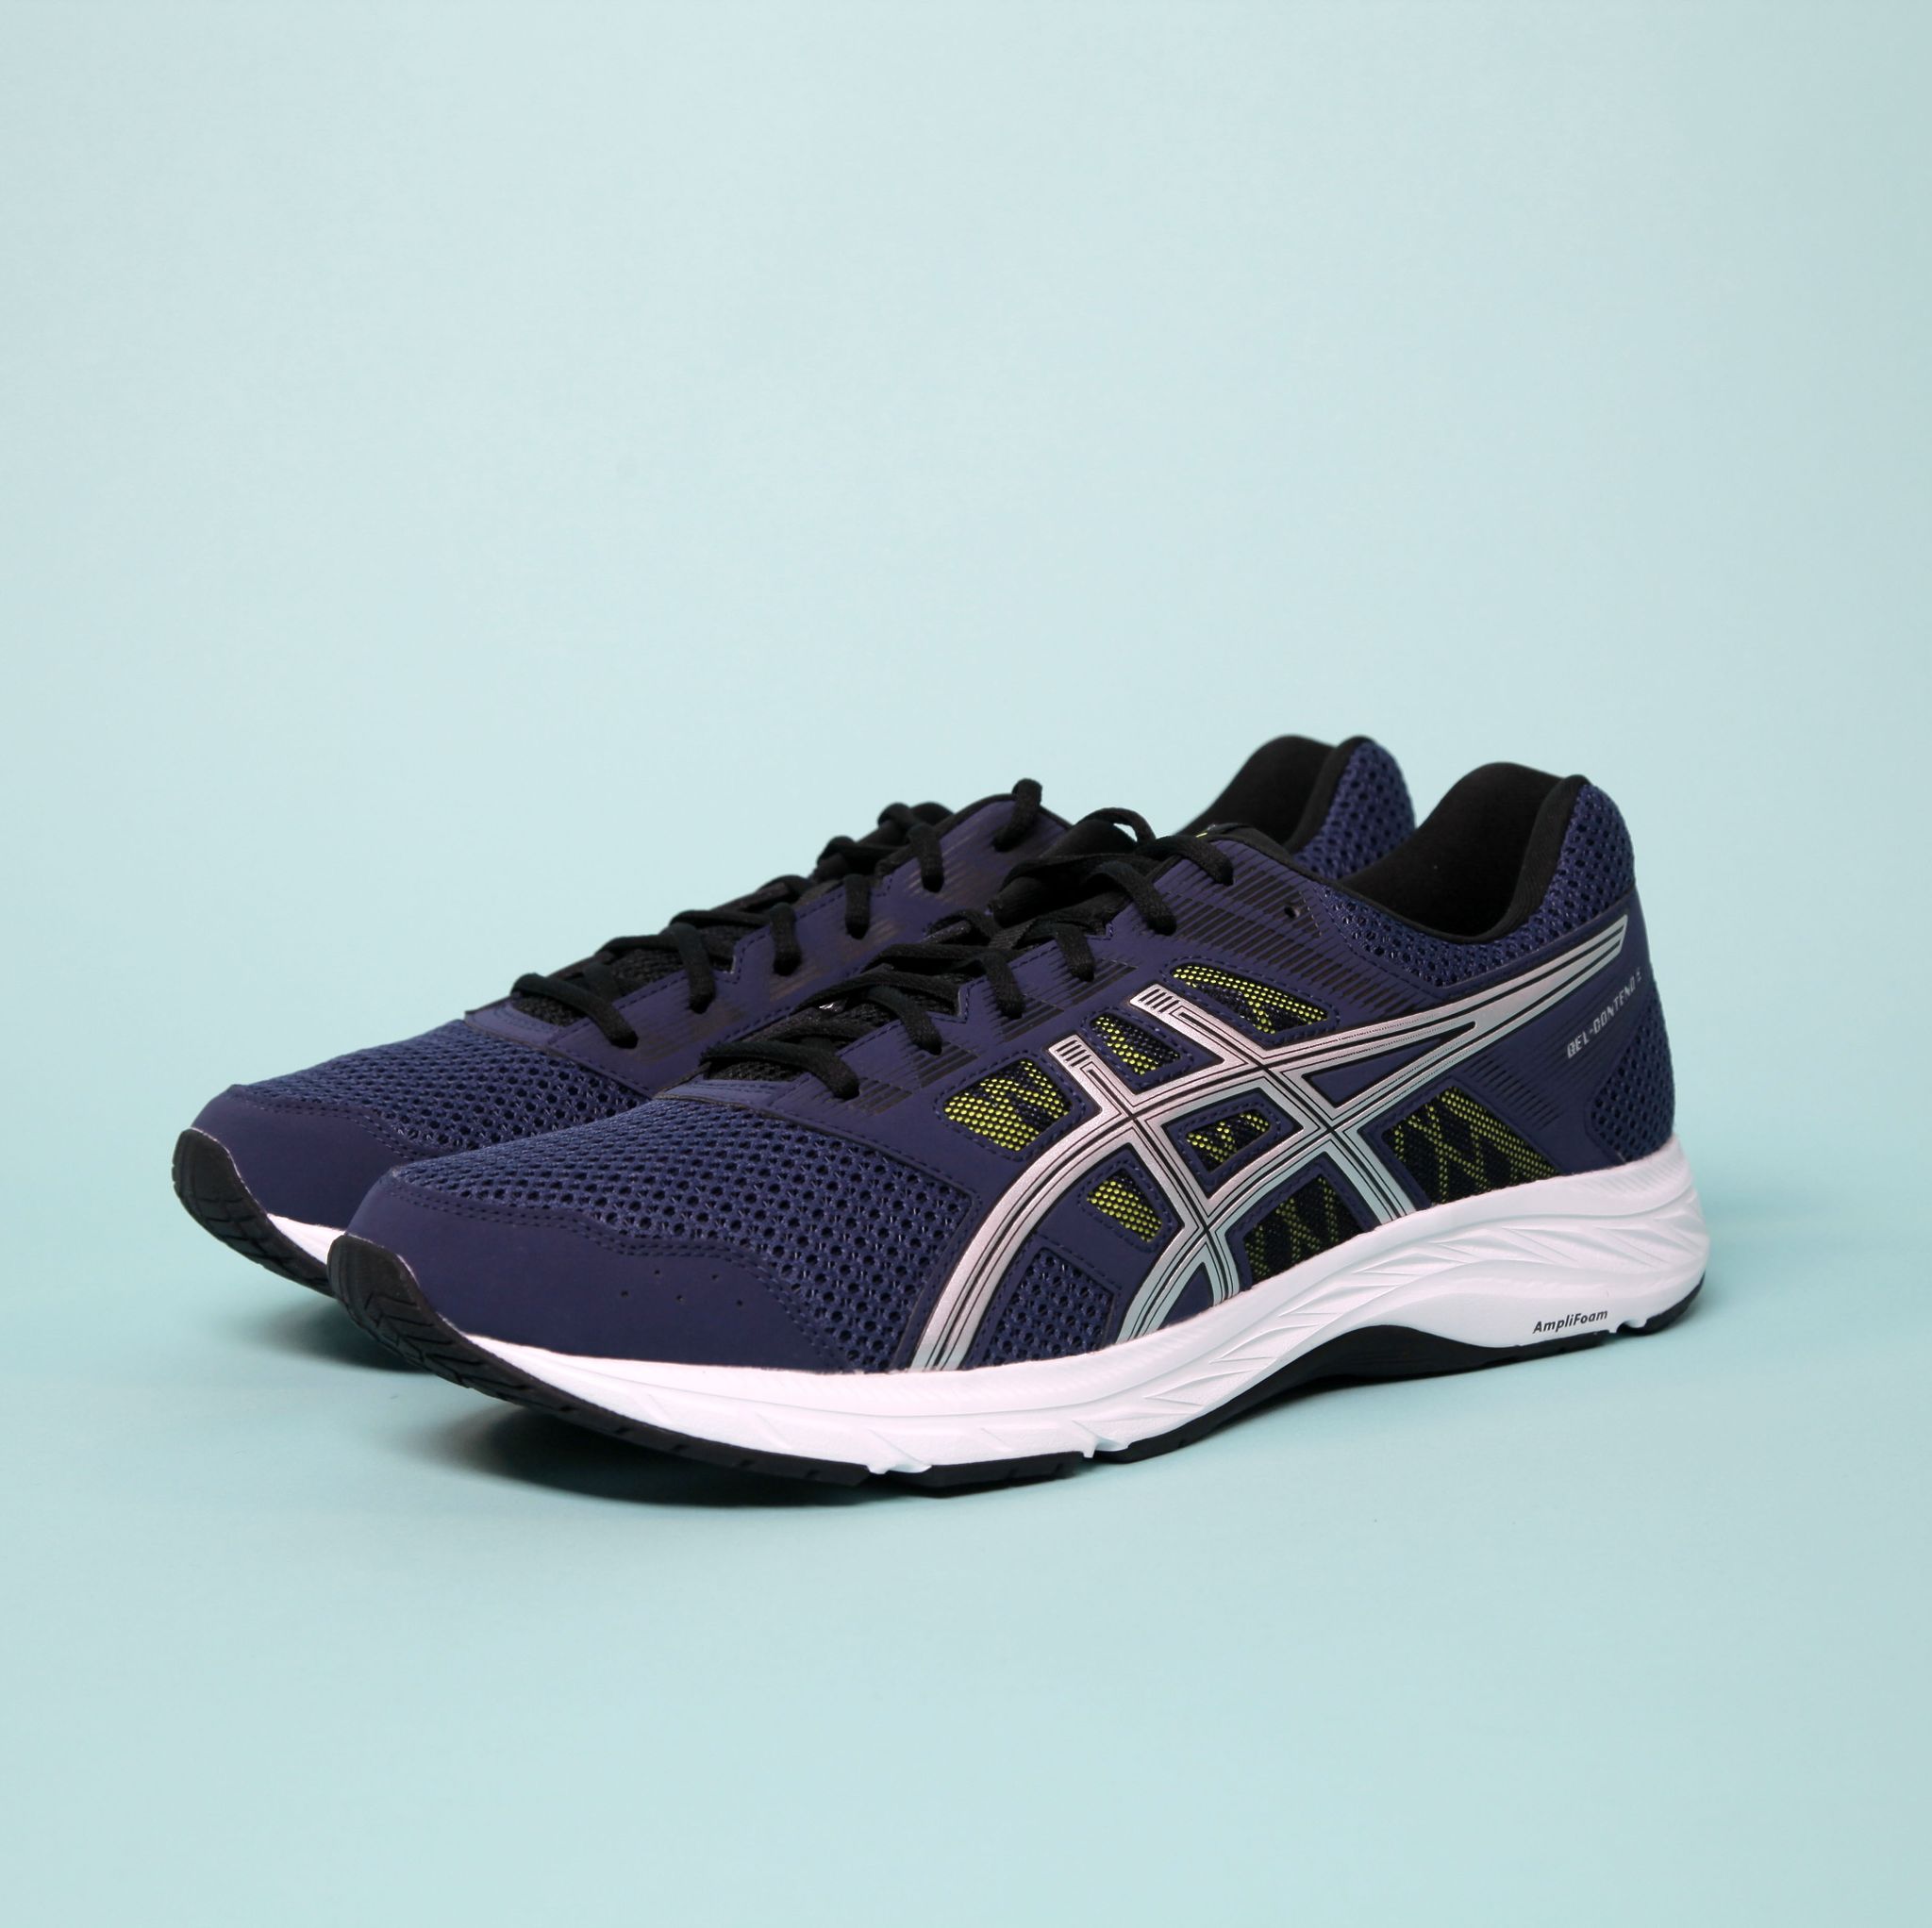 This £55 Asics shoe won our best value award, here's why